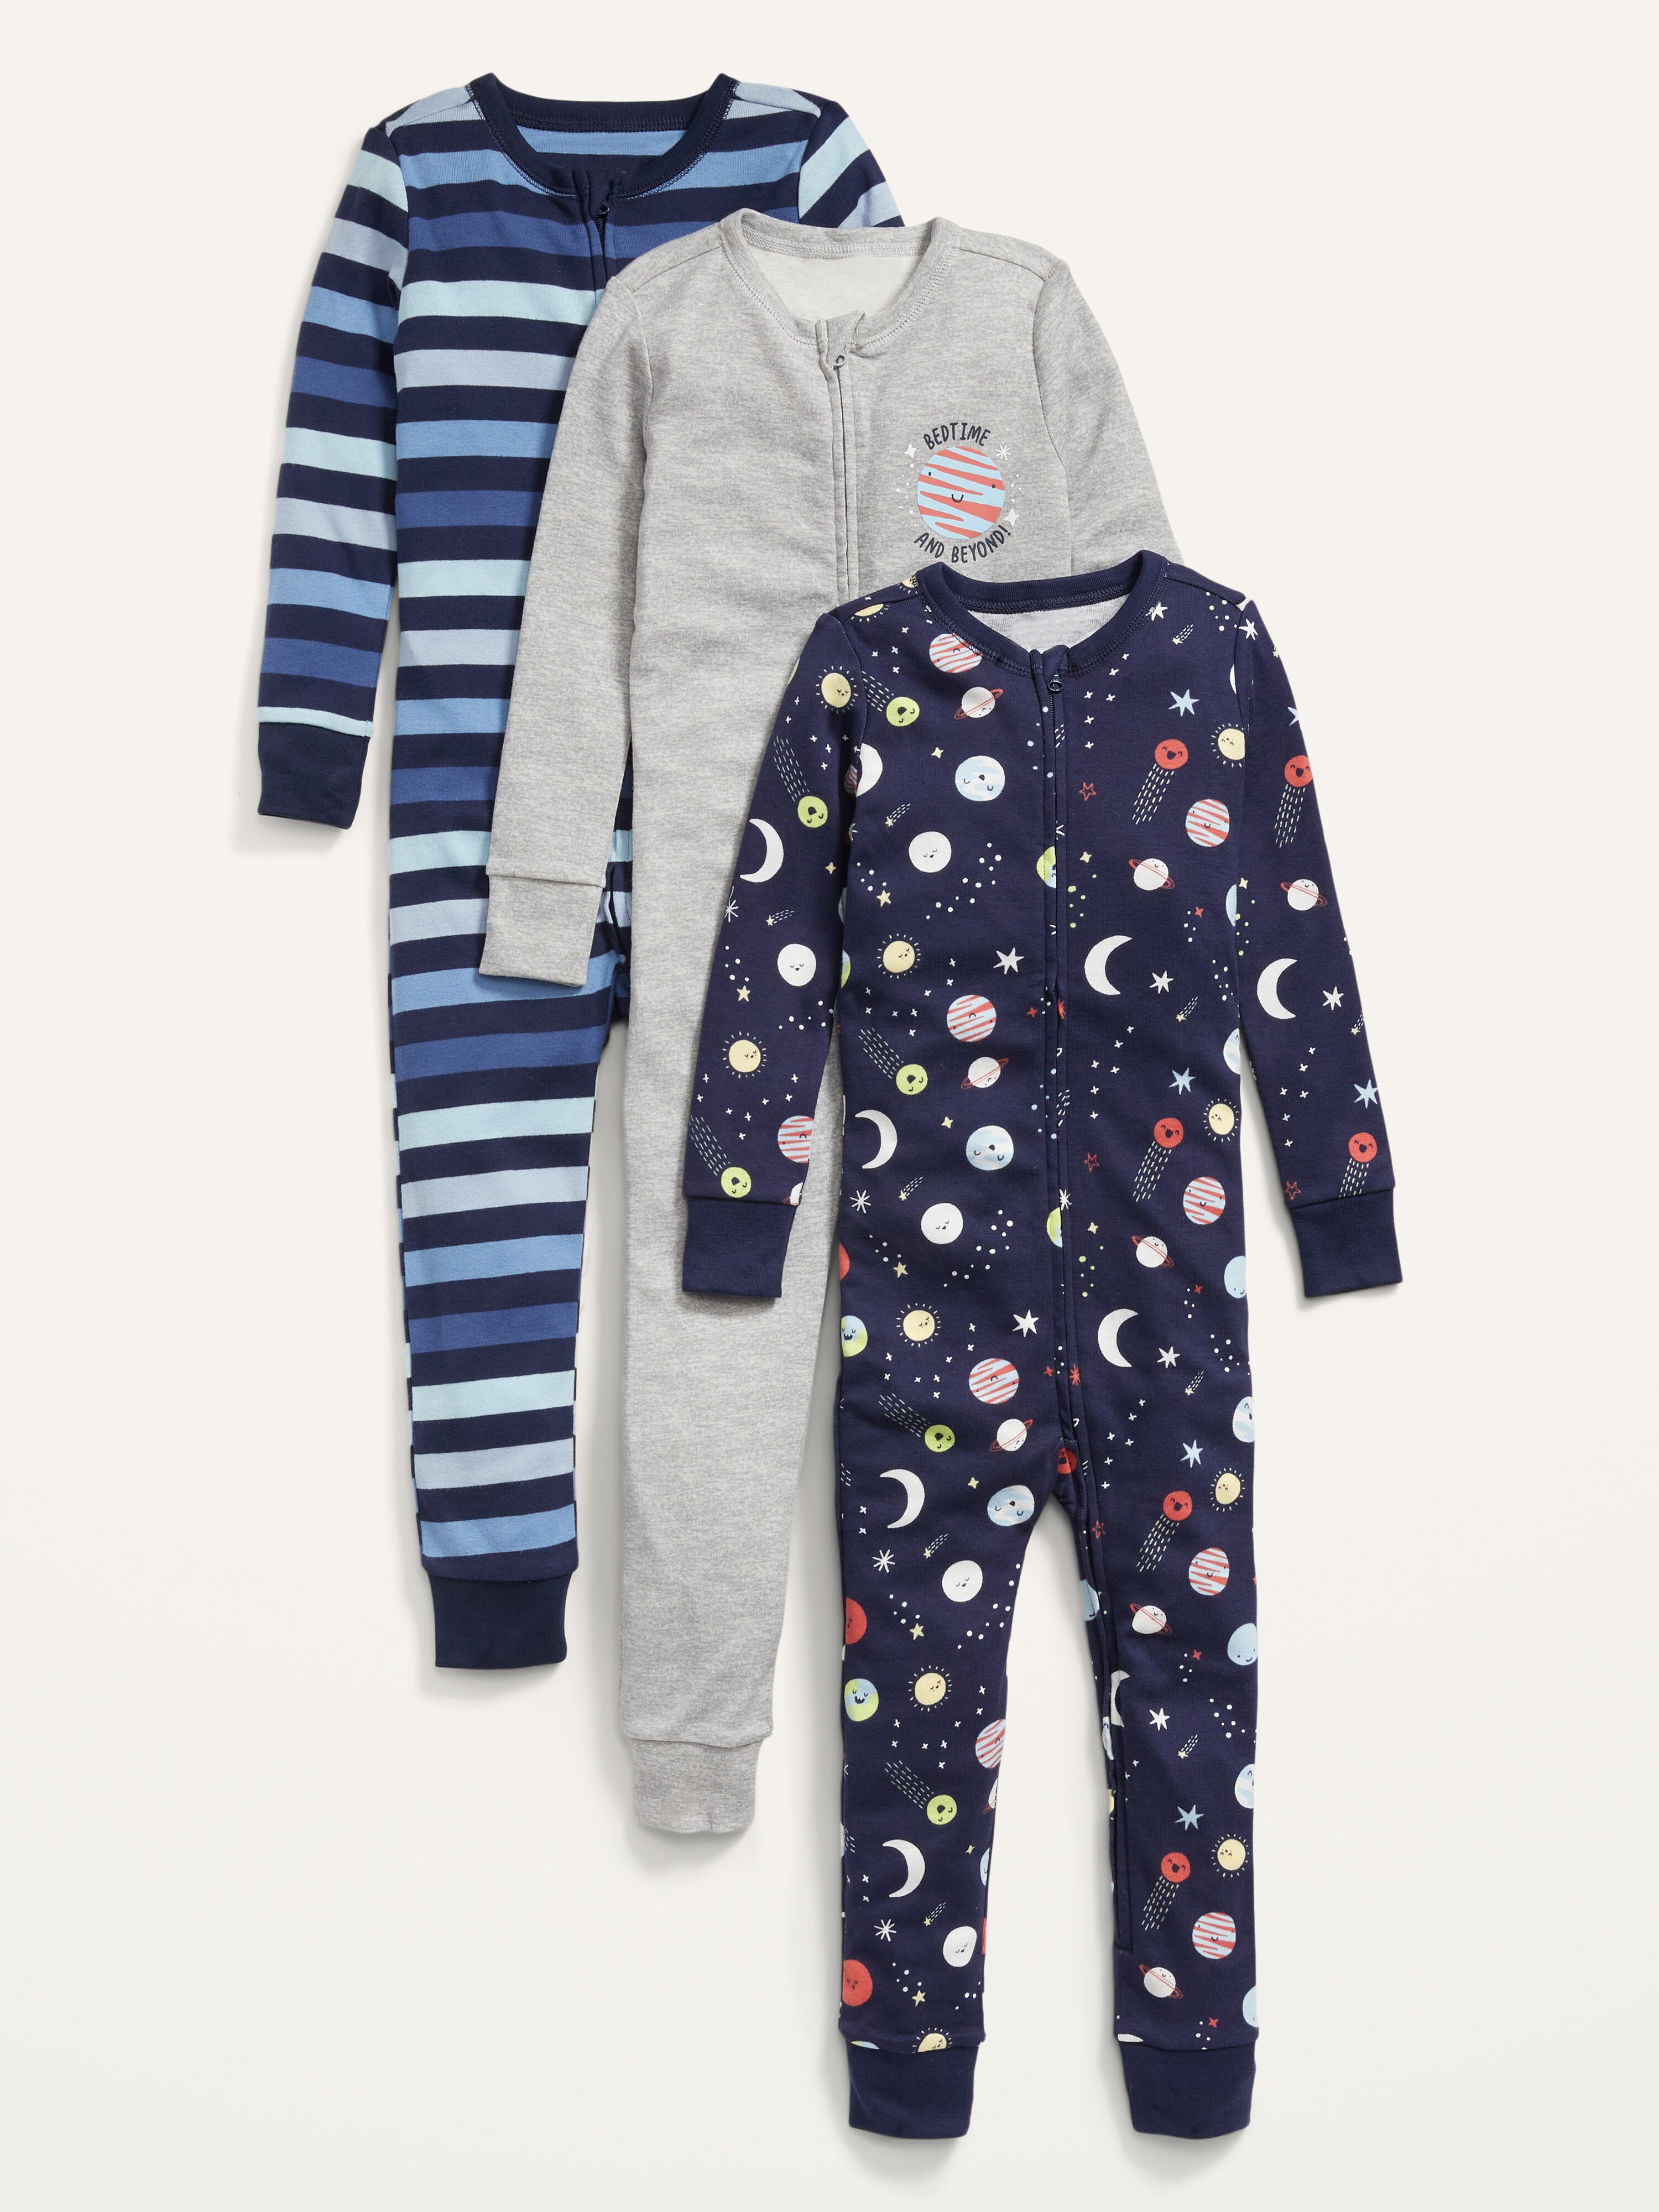 NWOT Details about   Little Me Full Zip One Piece Sleeper for Baby Boys 